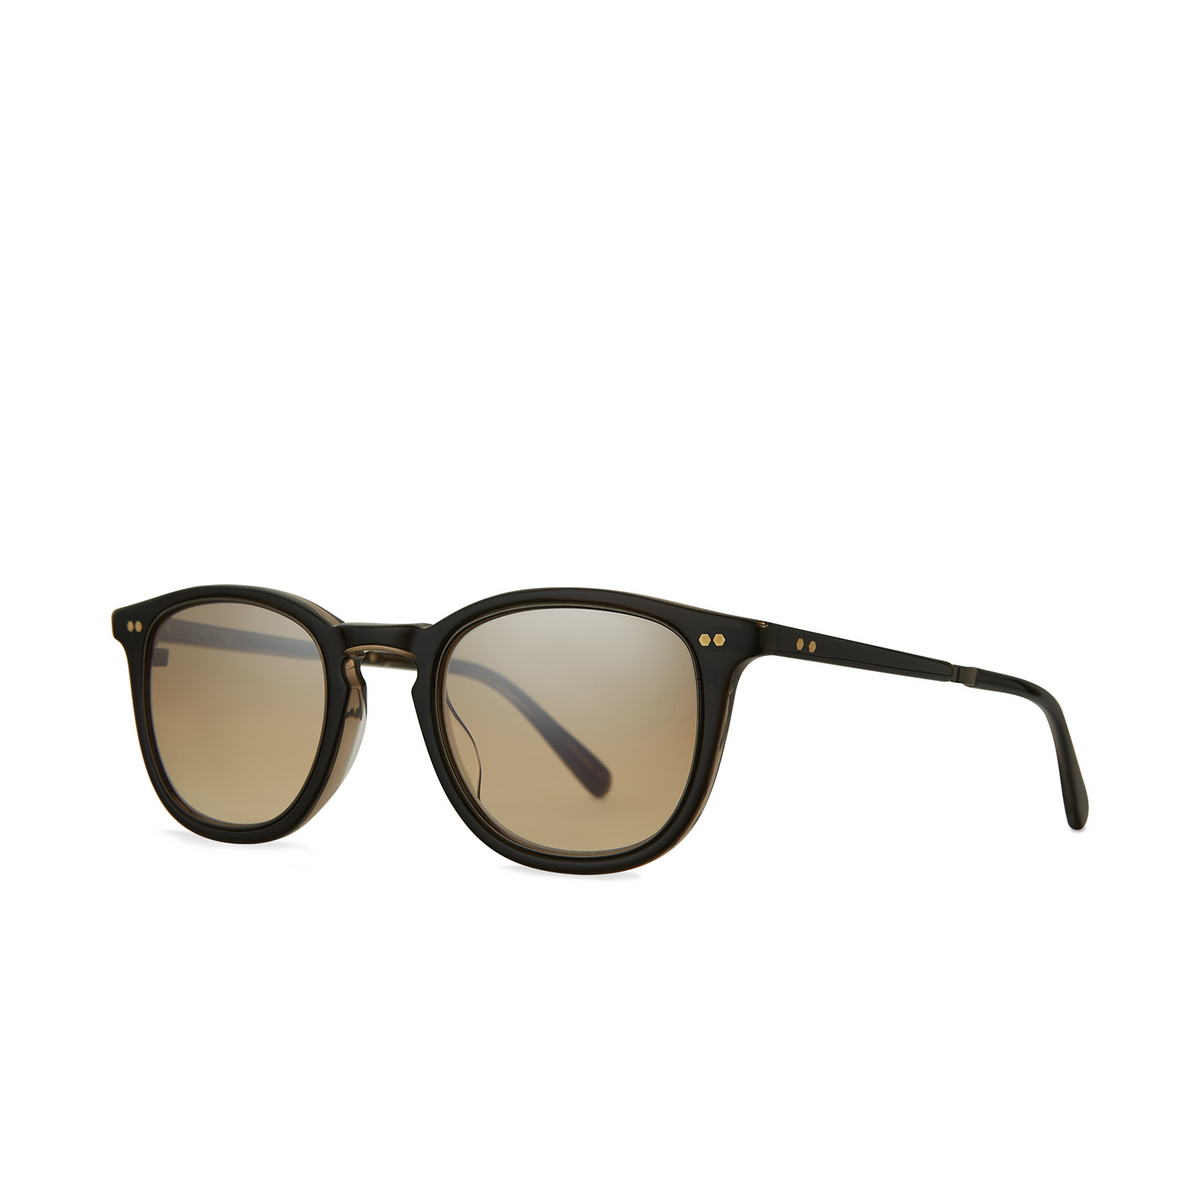 Mr. Leight COOPERS S Sunglasses BKTR-ATG/SMKY Black Tar - Antique Gold - three-quarters view